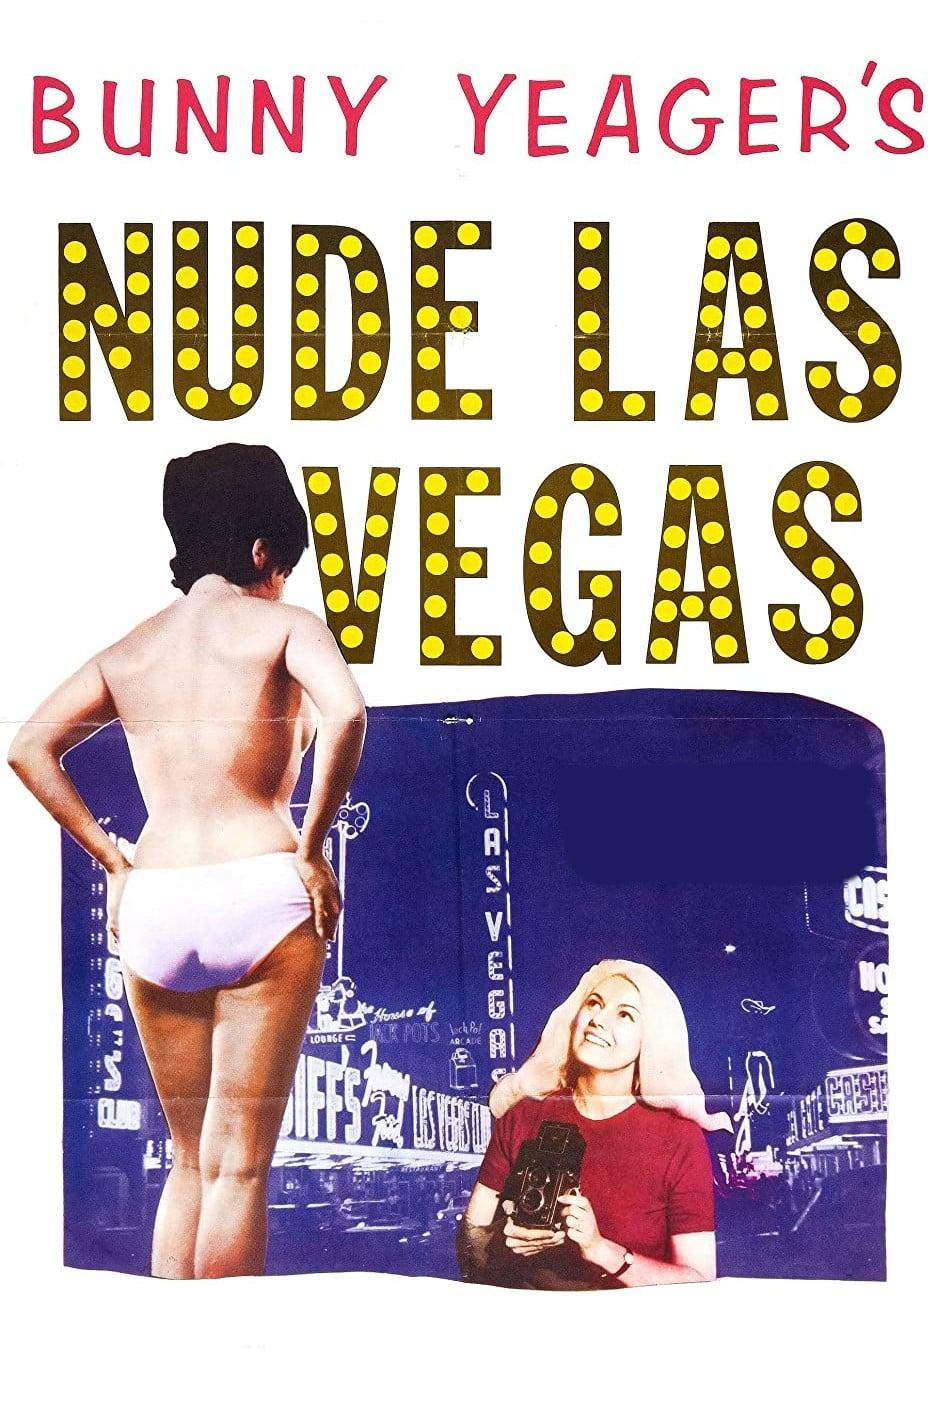 Bunny Yeager's Nude Las Vegas poster